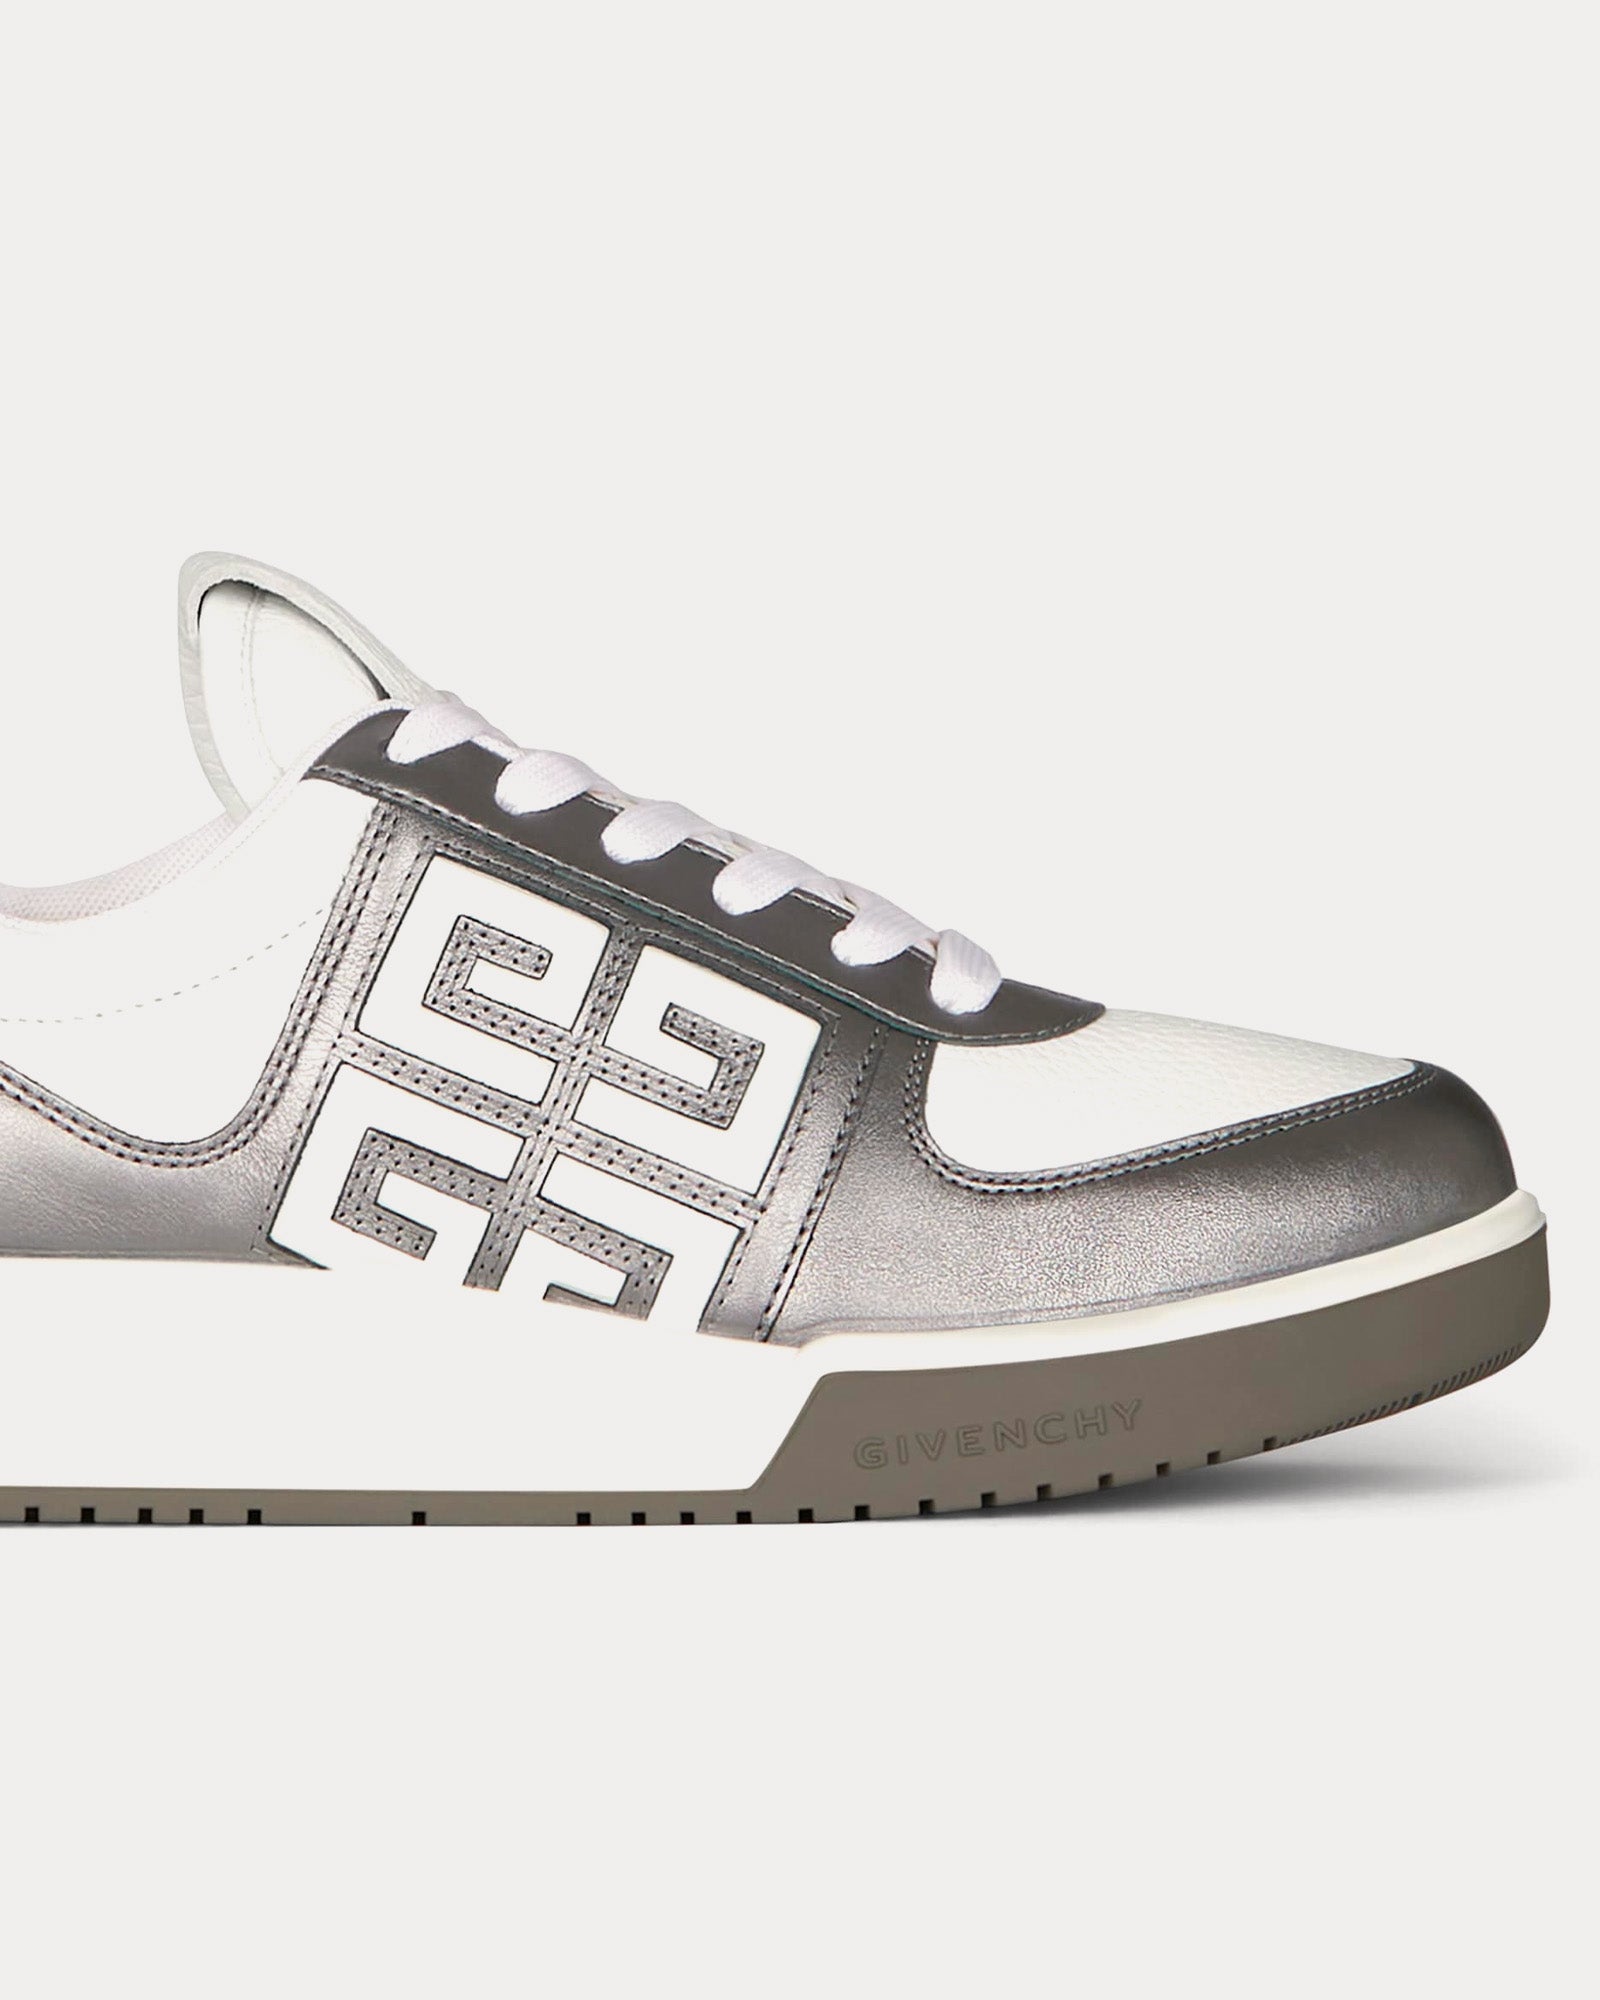 Givenchy - G4 Laminated Leather White / Silvery Low Top Sneakers